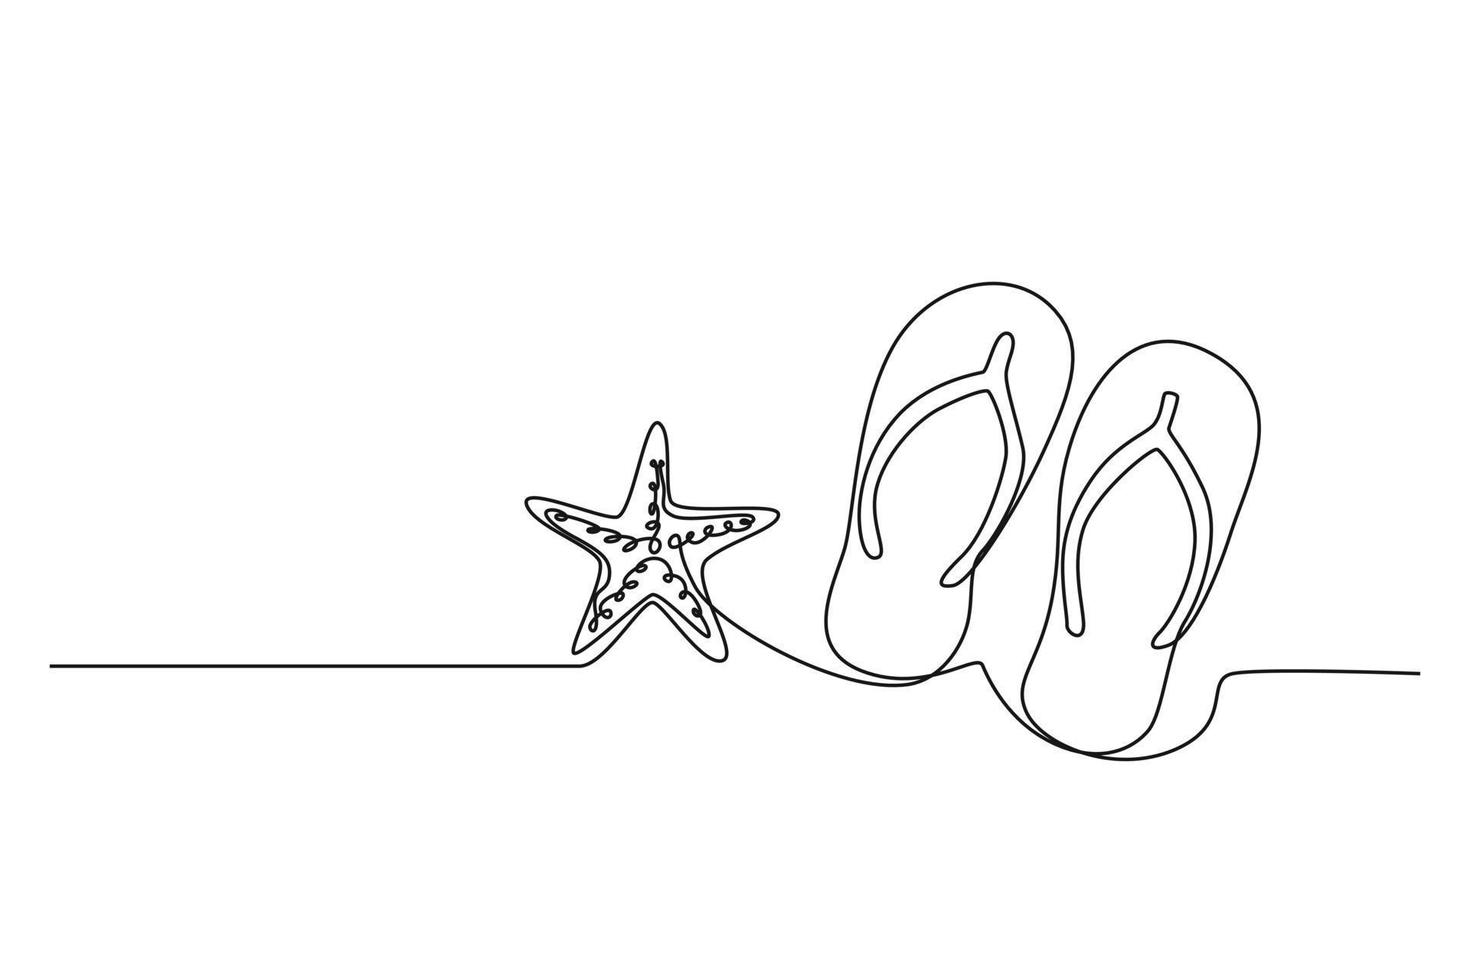 Single one line drawing starfish and beach slippers. Summer beach concept. Continuous line draw design graphic vector illustration.